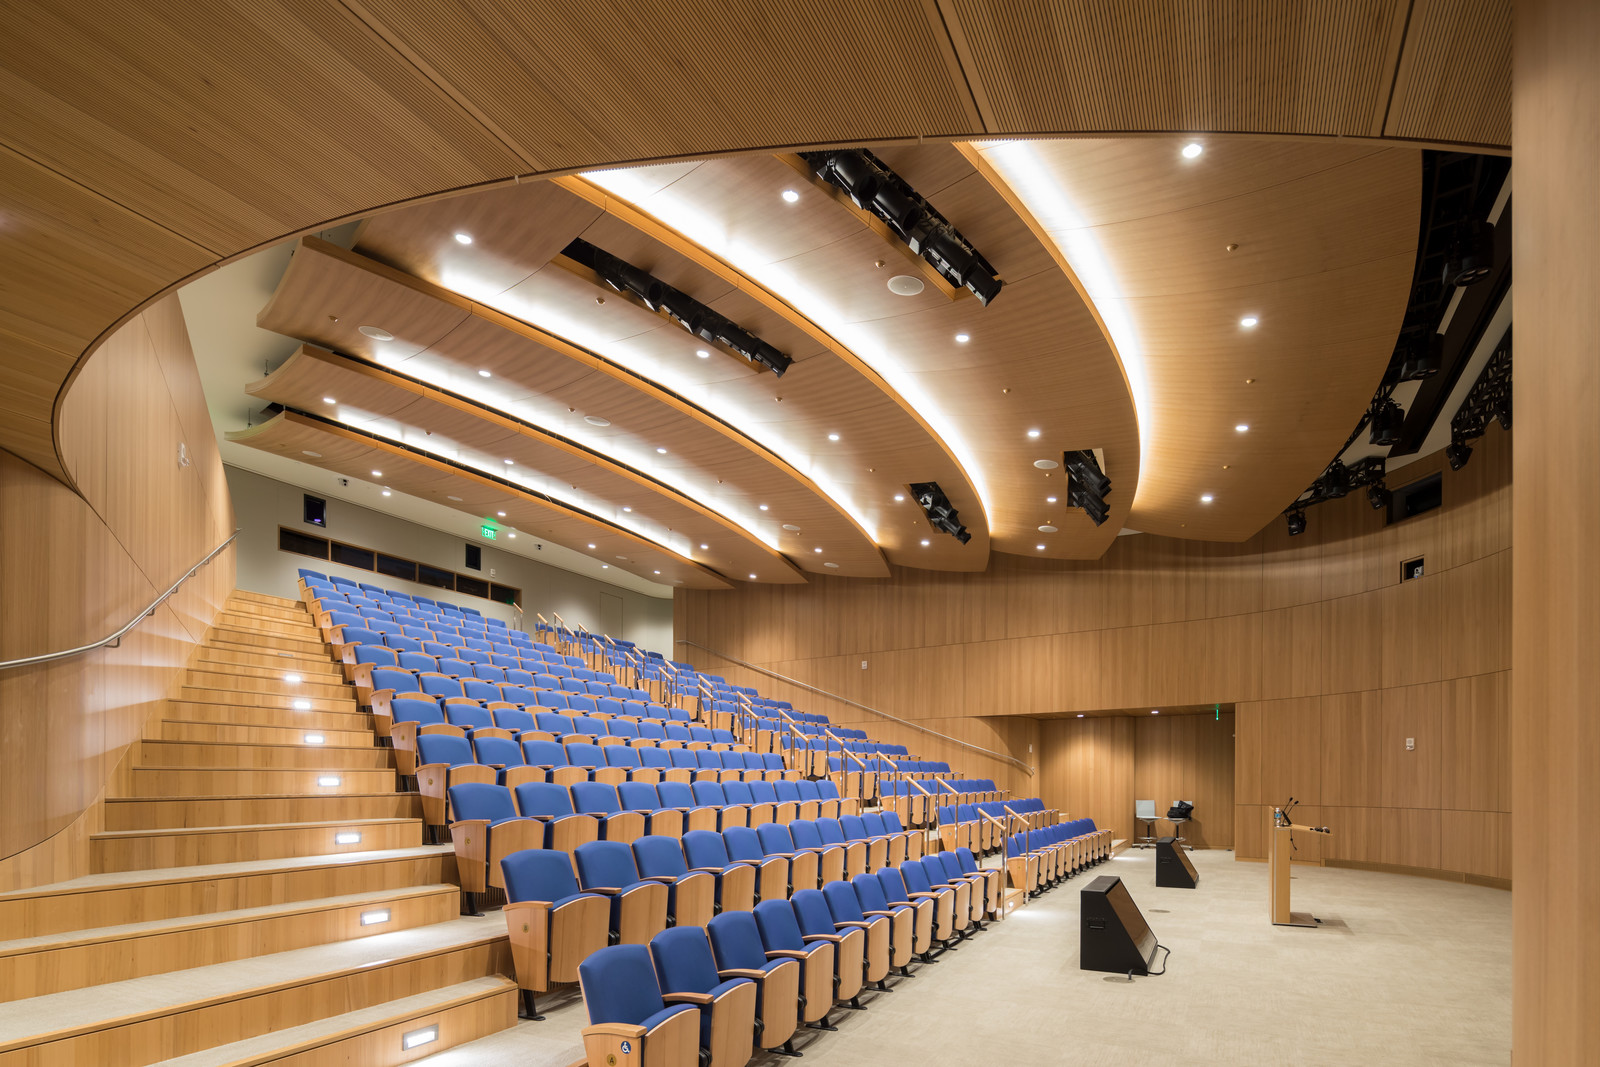 This beautiful auditorium features curved acoustic paneling of quartered Elm. The ceiling was very technical although it is made to look like light layers of clouds. Extensive modeling was essential to meet the acoustic requirement and to coordinate the complex mechanical, electrical and AV specifications